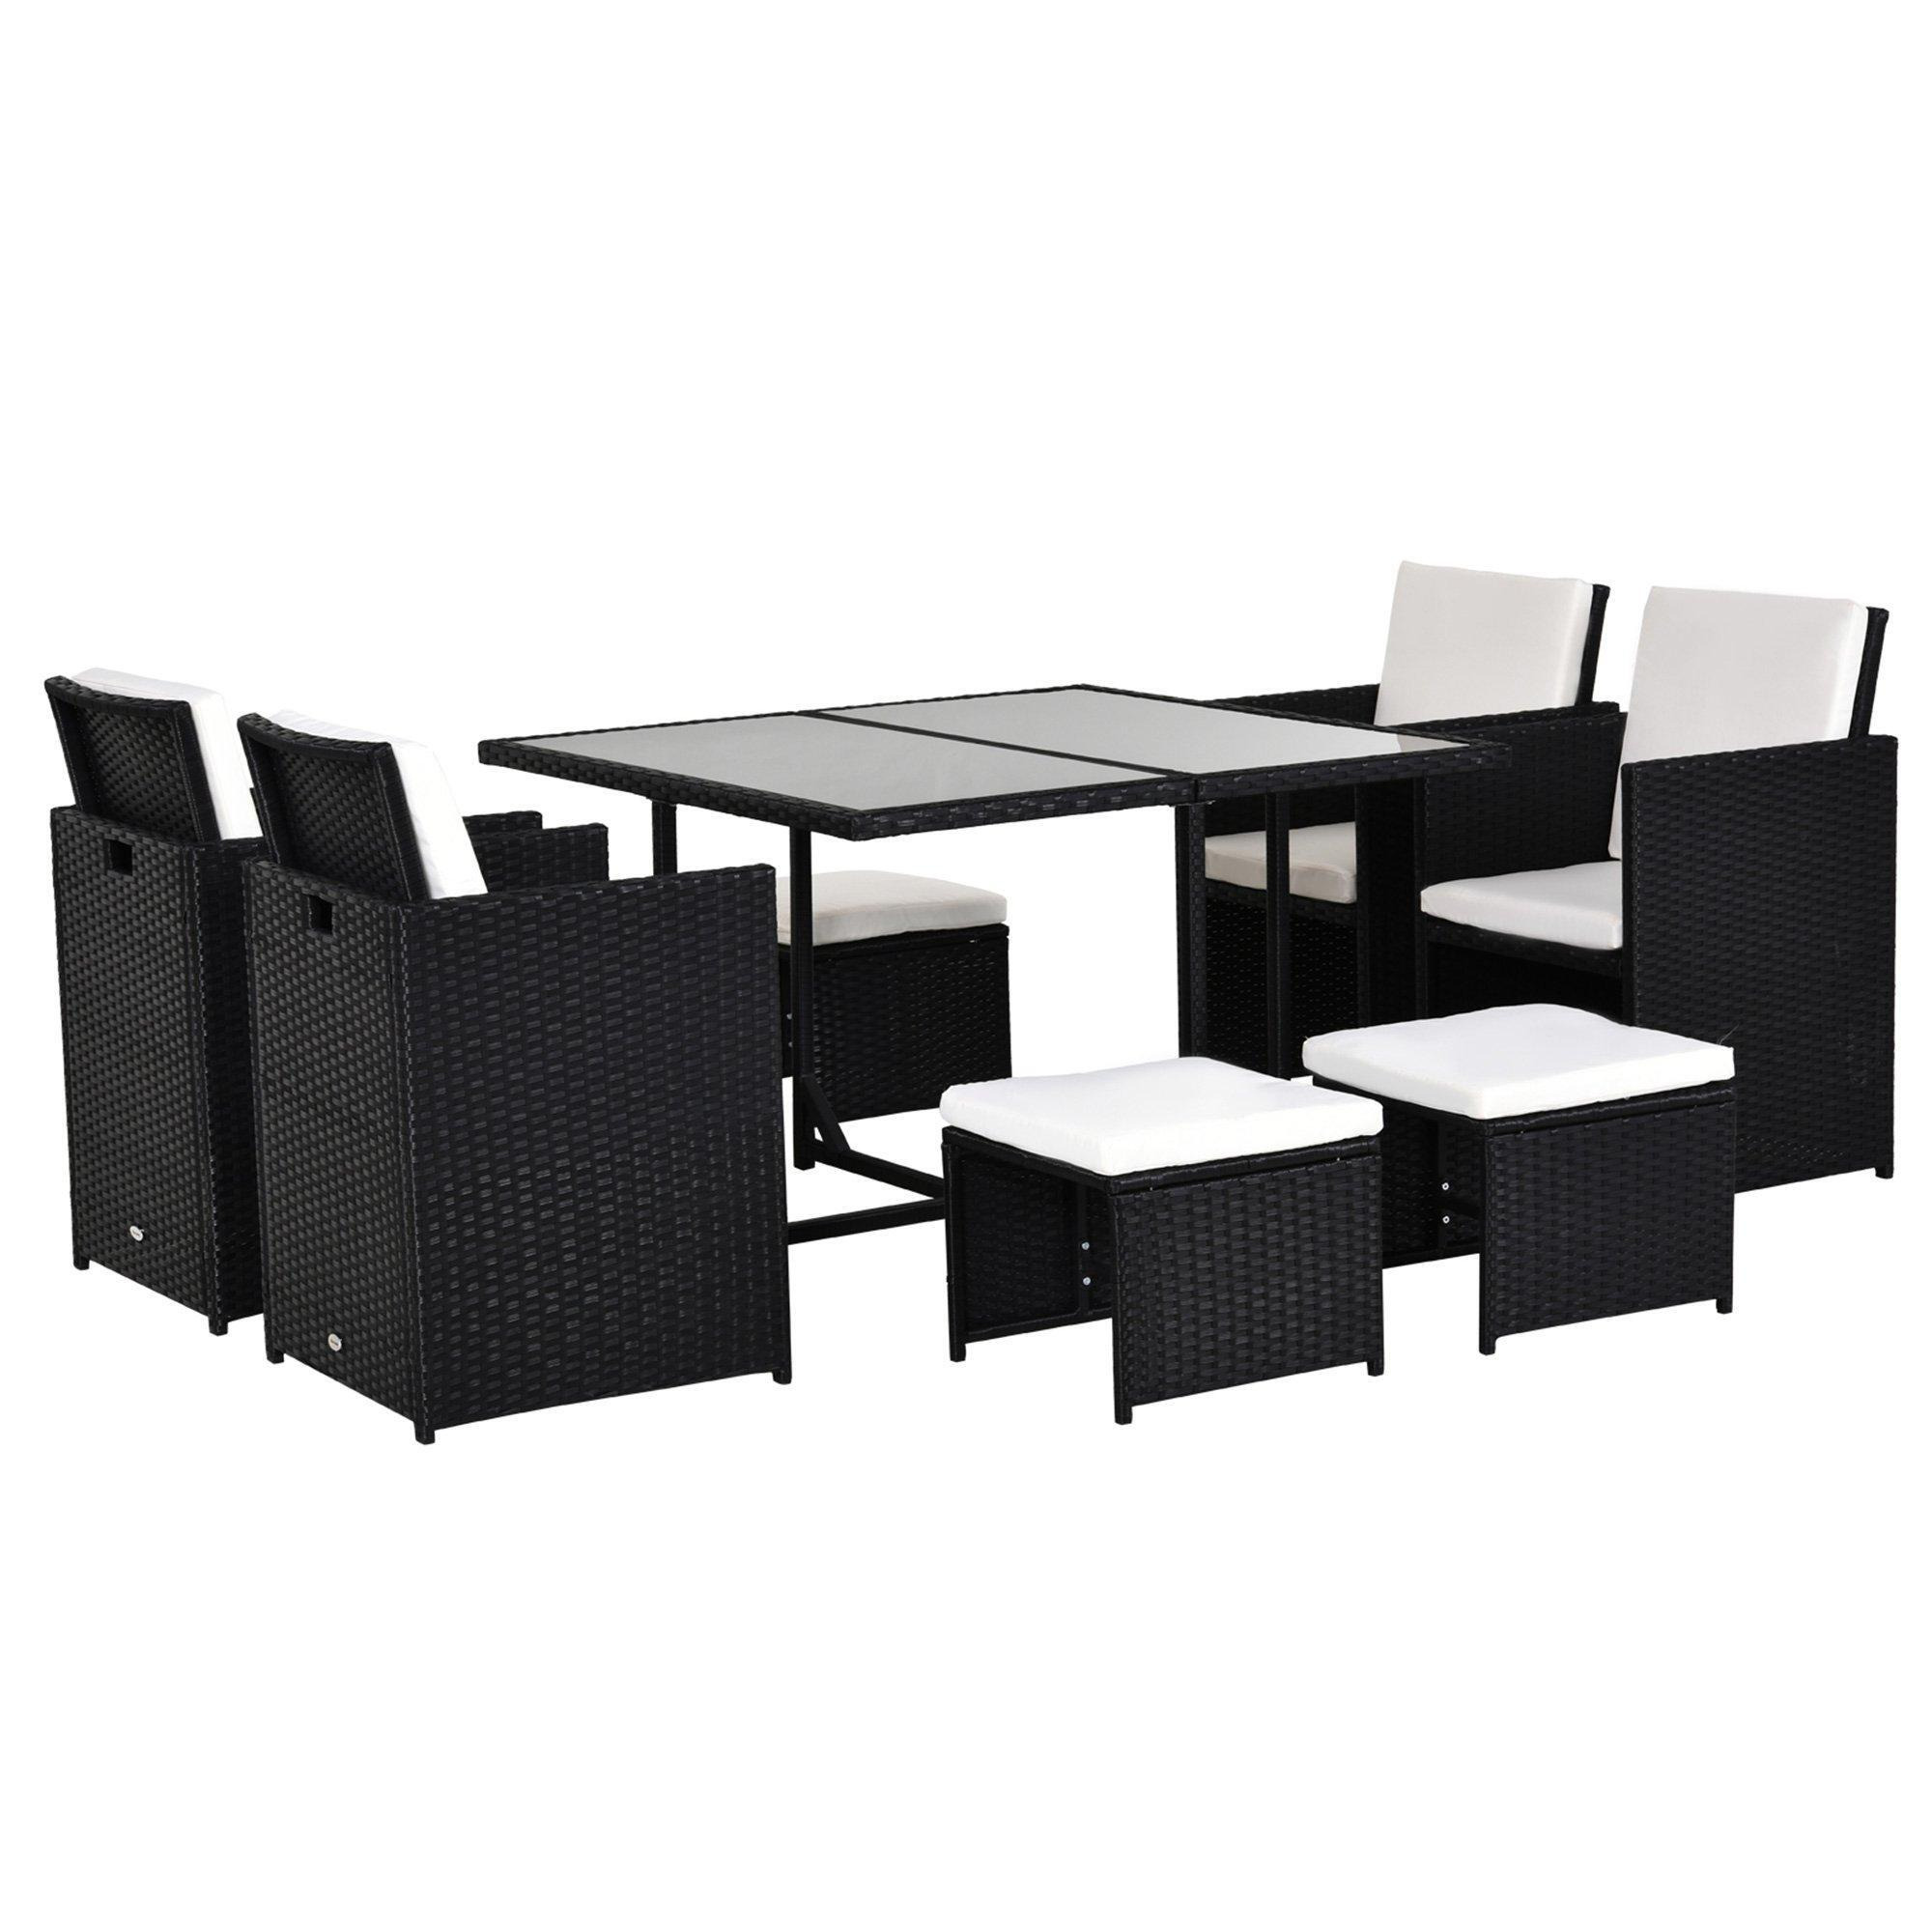 9PC Rattan Garden Furniture Outdoor Patio Dining Table Set with 8 Stools - image 1